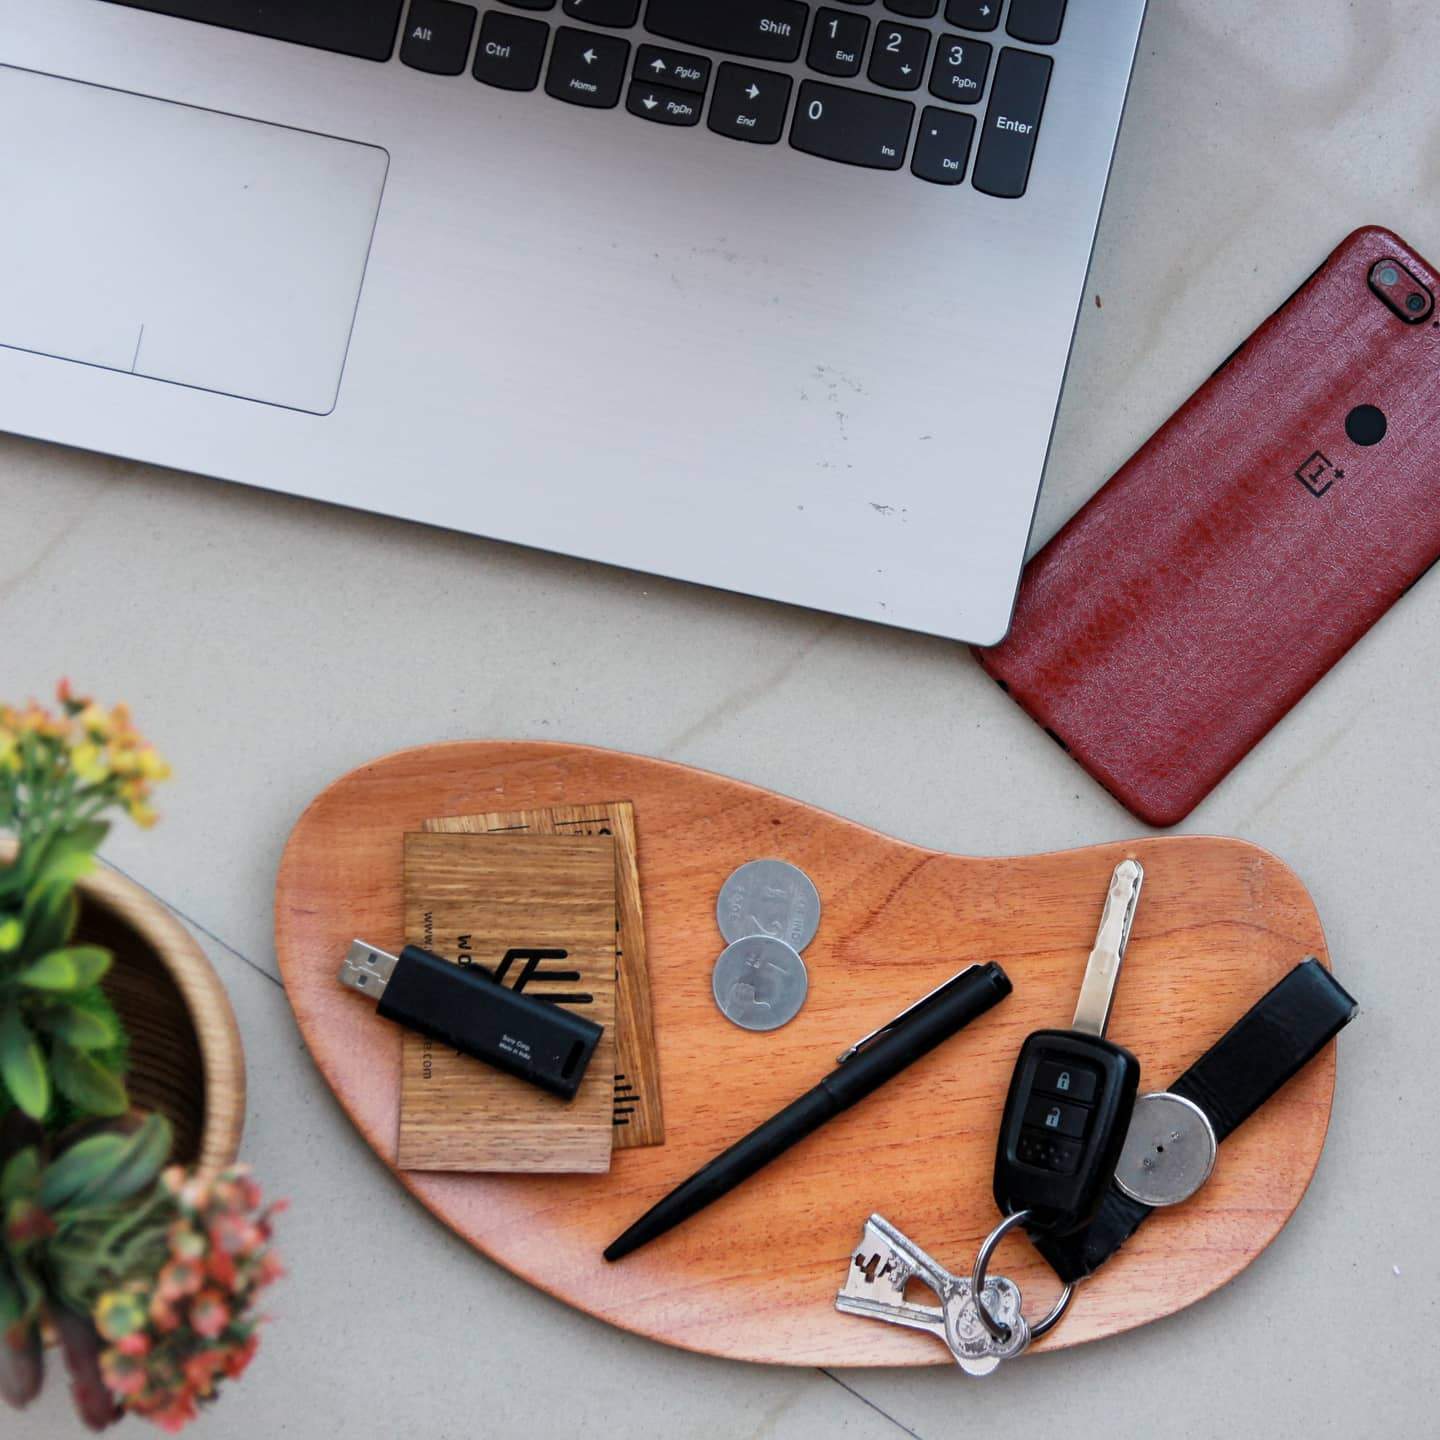 Office Decor: Wooden Desk Trays Are Important Office Supplies. This Desk Organizer Makes Great Office Desk Accessories. These Office Accessories Are Great Gifts For Employees and Colleagues